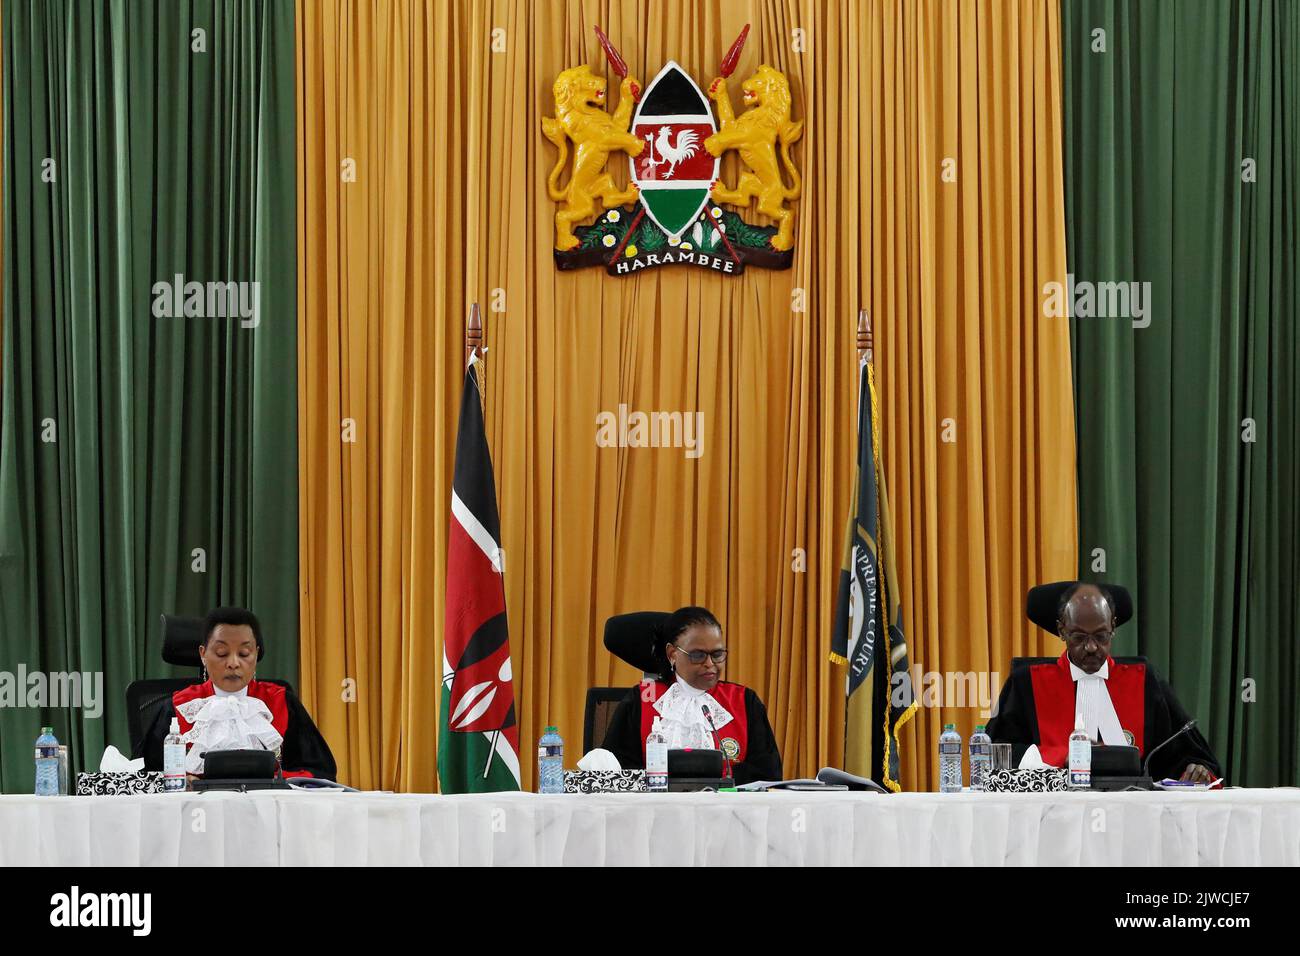 Kenya's Supreme Court Judges Philomena Mwilu, Martha Koome and Mohammed Ibrahim preside to deliver the ruling on a petition seeking to invalidate the outcome of the recent presidential election, at the Supreme Court in Nairobi, Kenya September 5, 2022. REUTERS/Thomas Mukoya Stock Photo